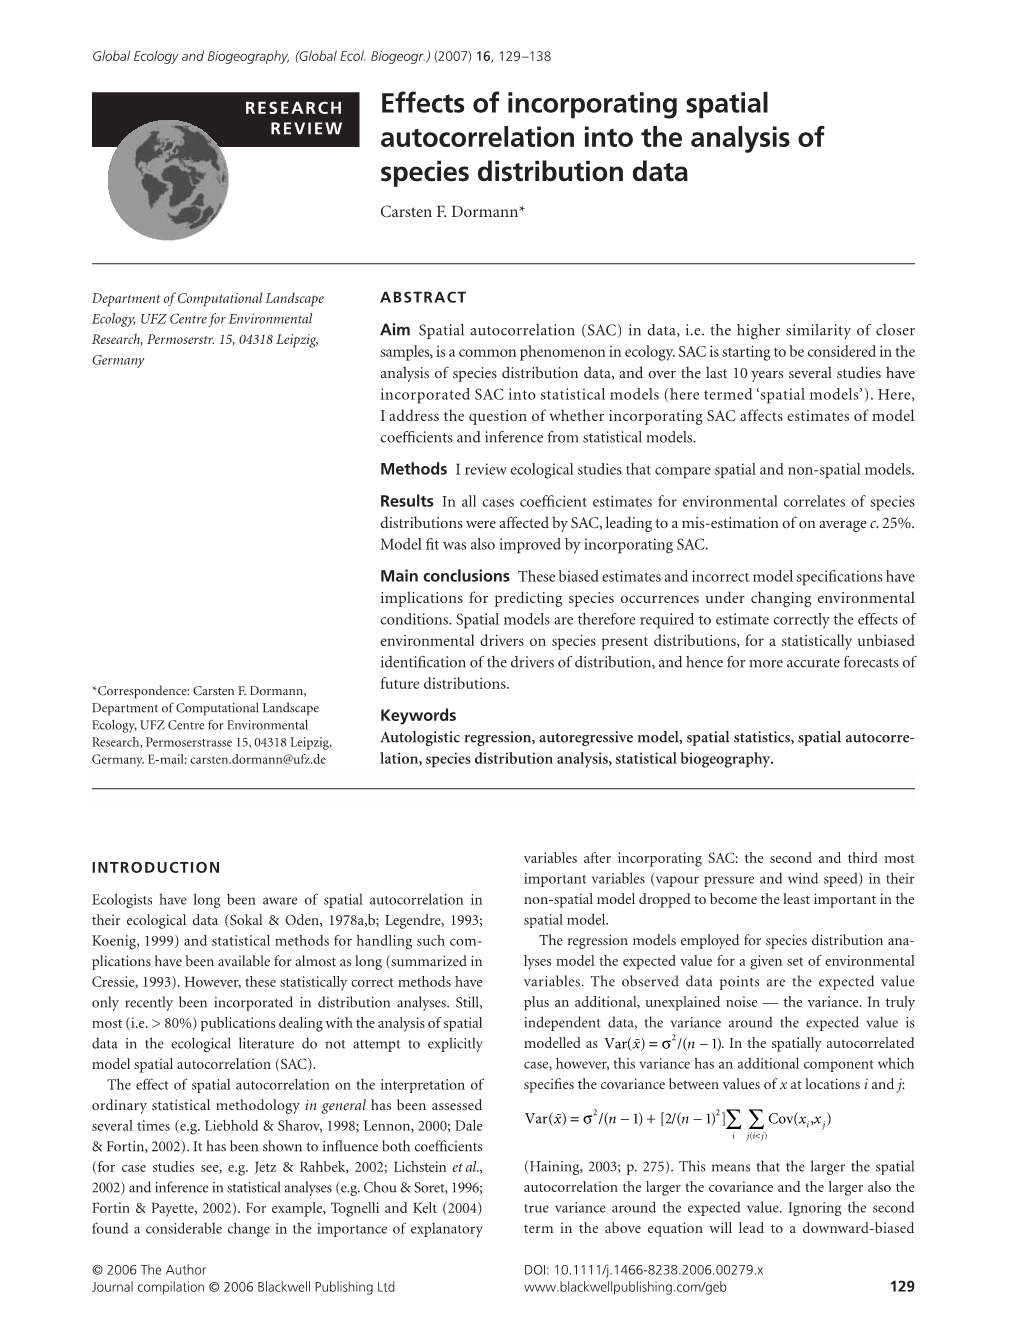 Effects of Incorporating Spatial Autocorrelation Into the Analysis Of